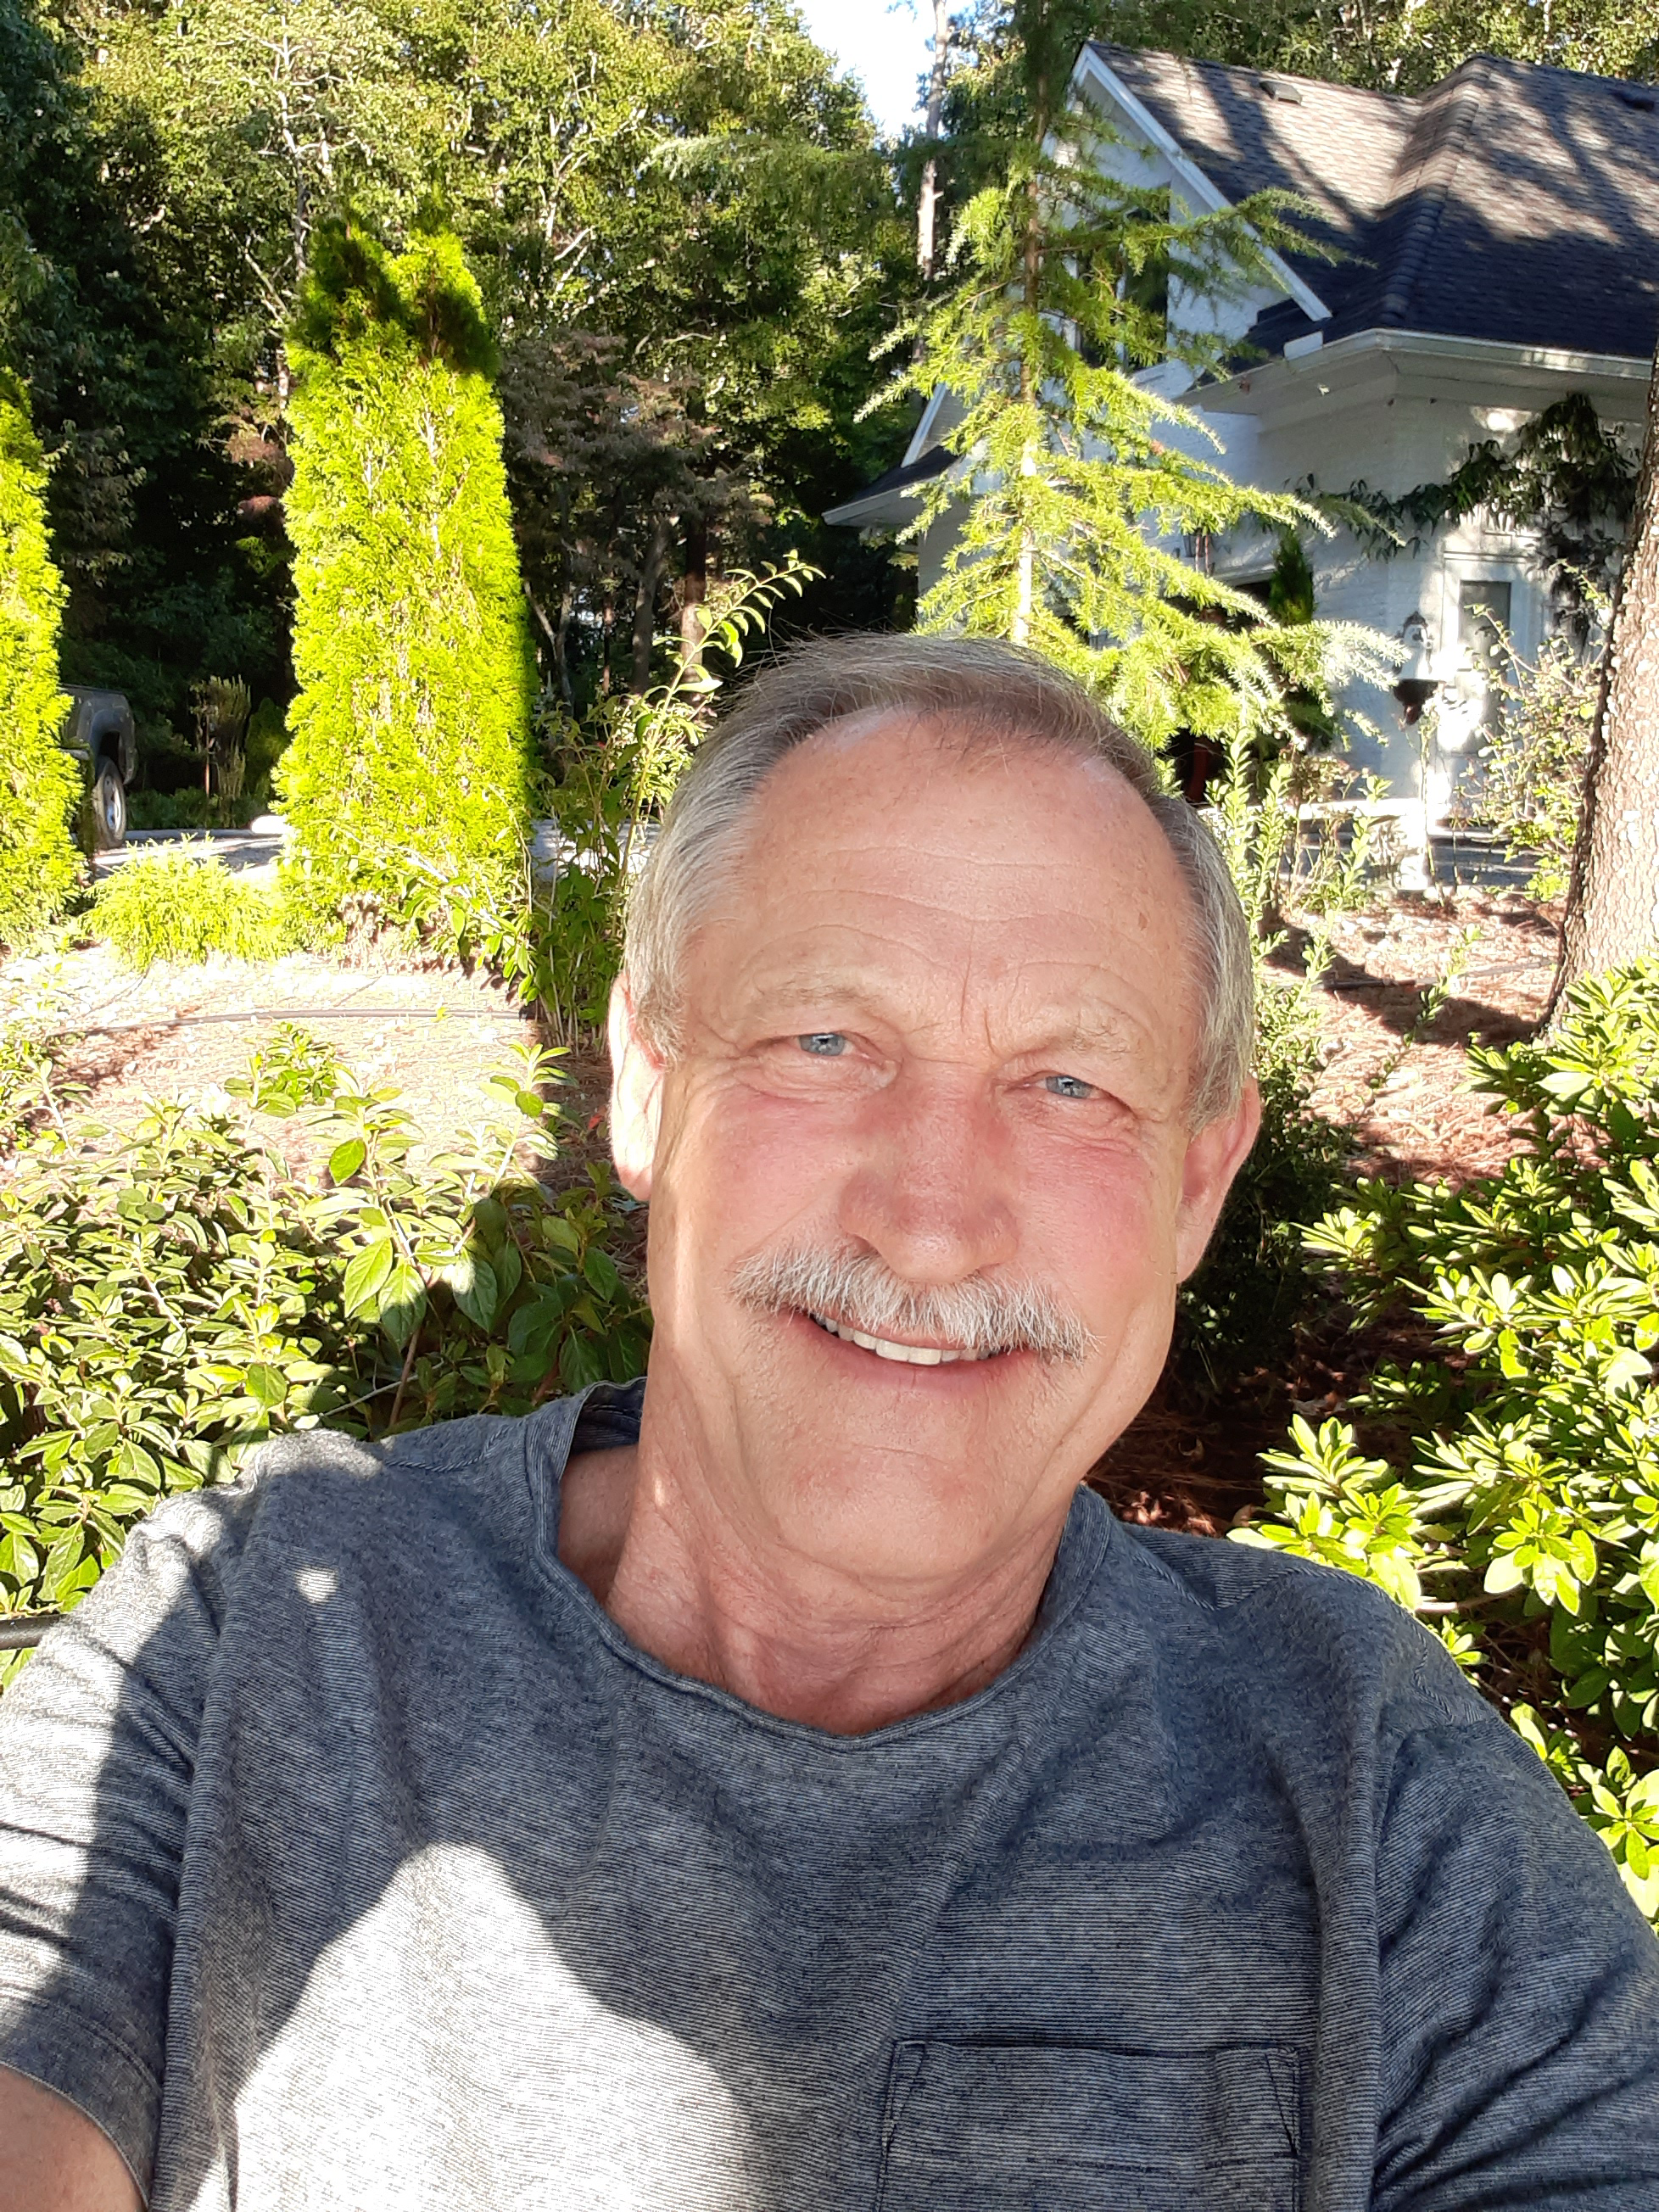 Photo of smiling man with a moustache wearing a gray shirt; a house and trees are in the background